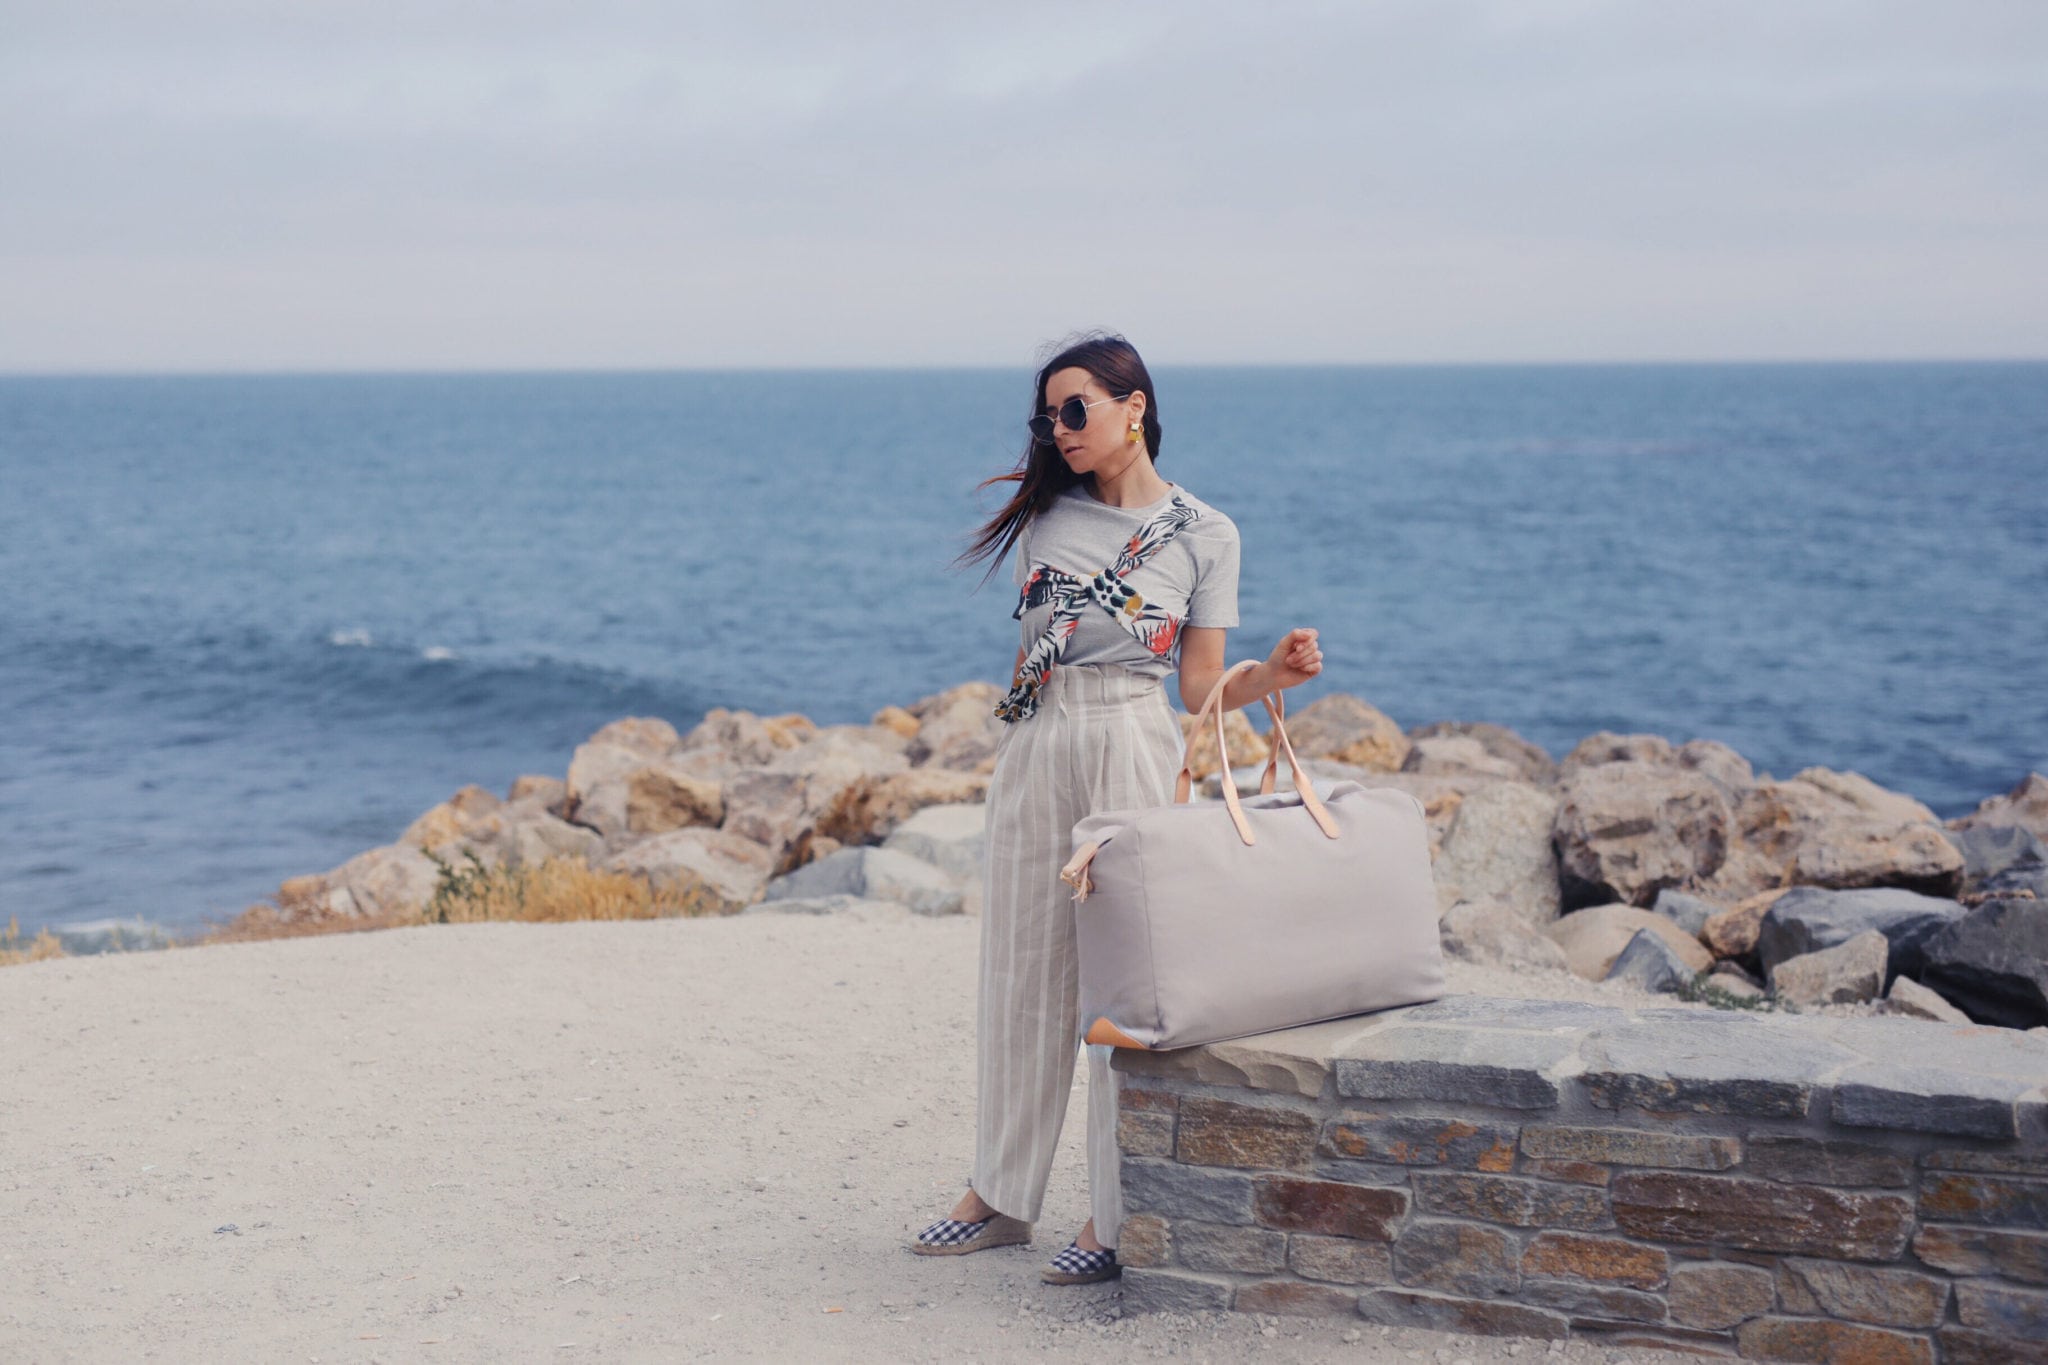 Summer Must-Have Items to pack - Review of cuyana weekender bag - weekend style ideas and cuyana review on Houseofcomil.com